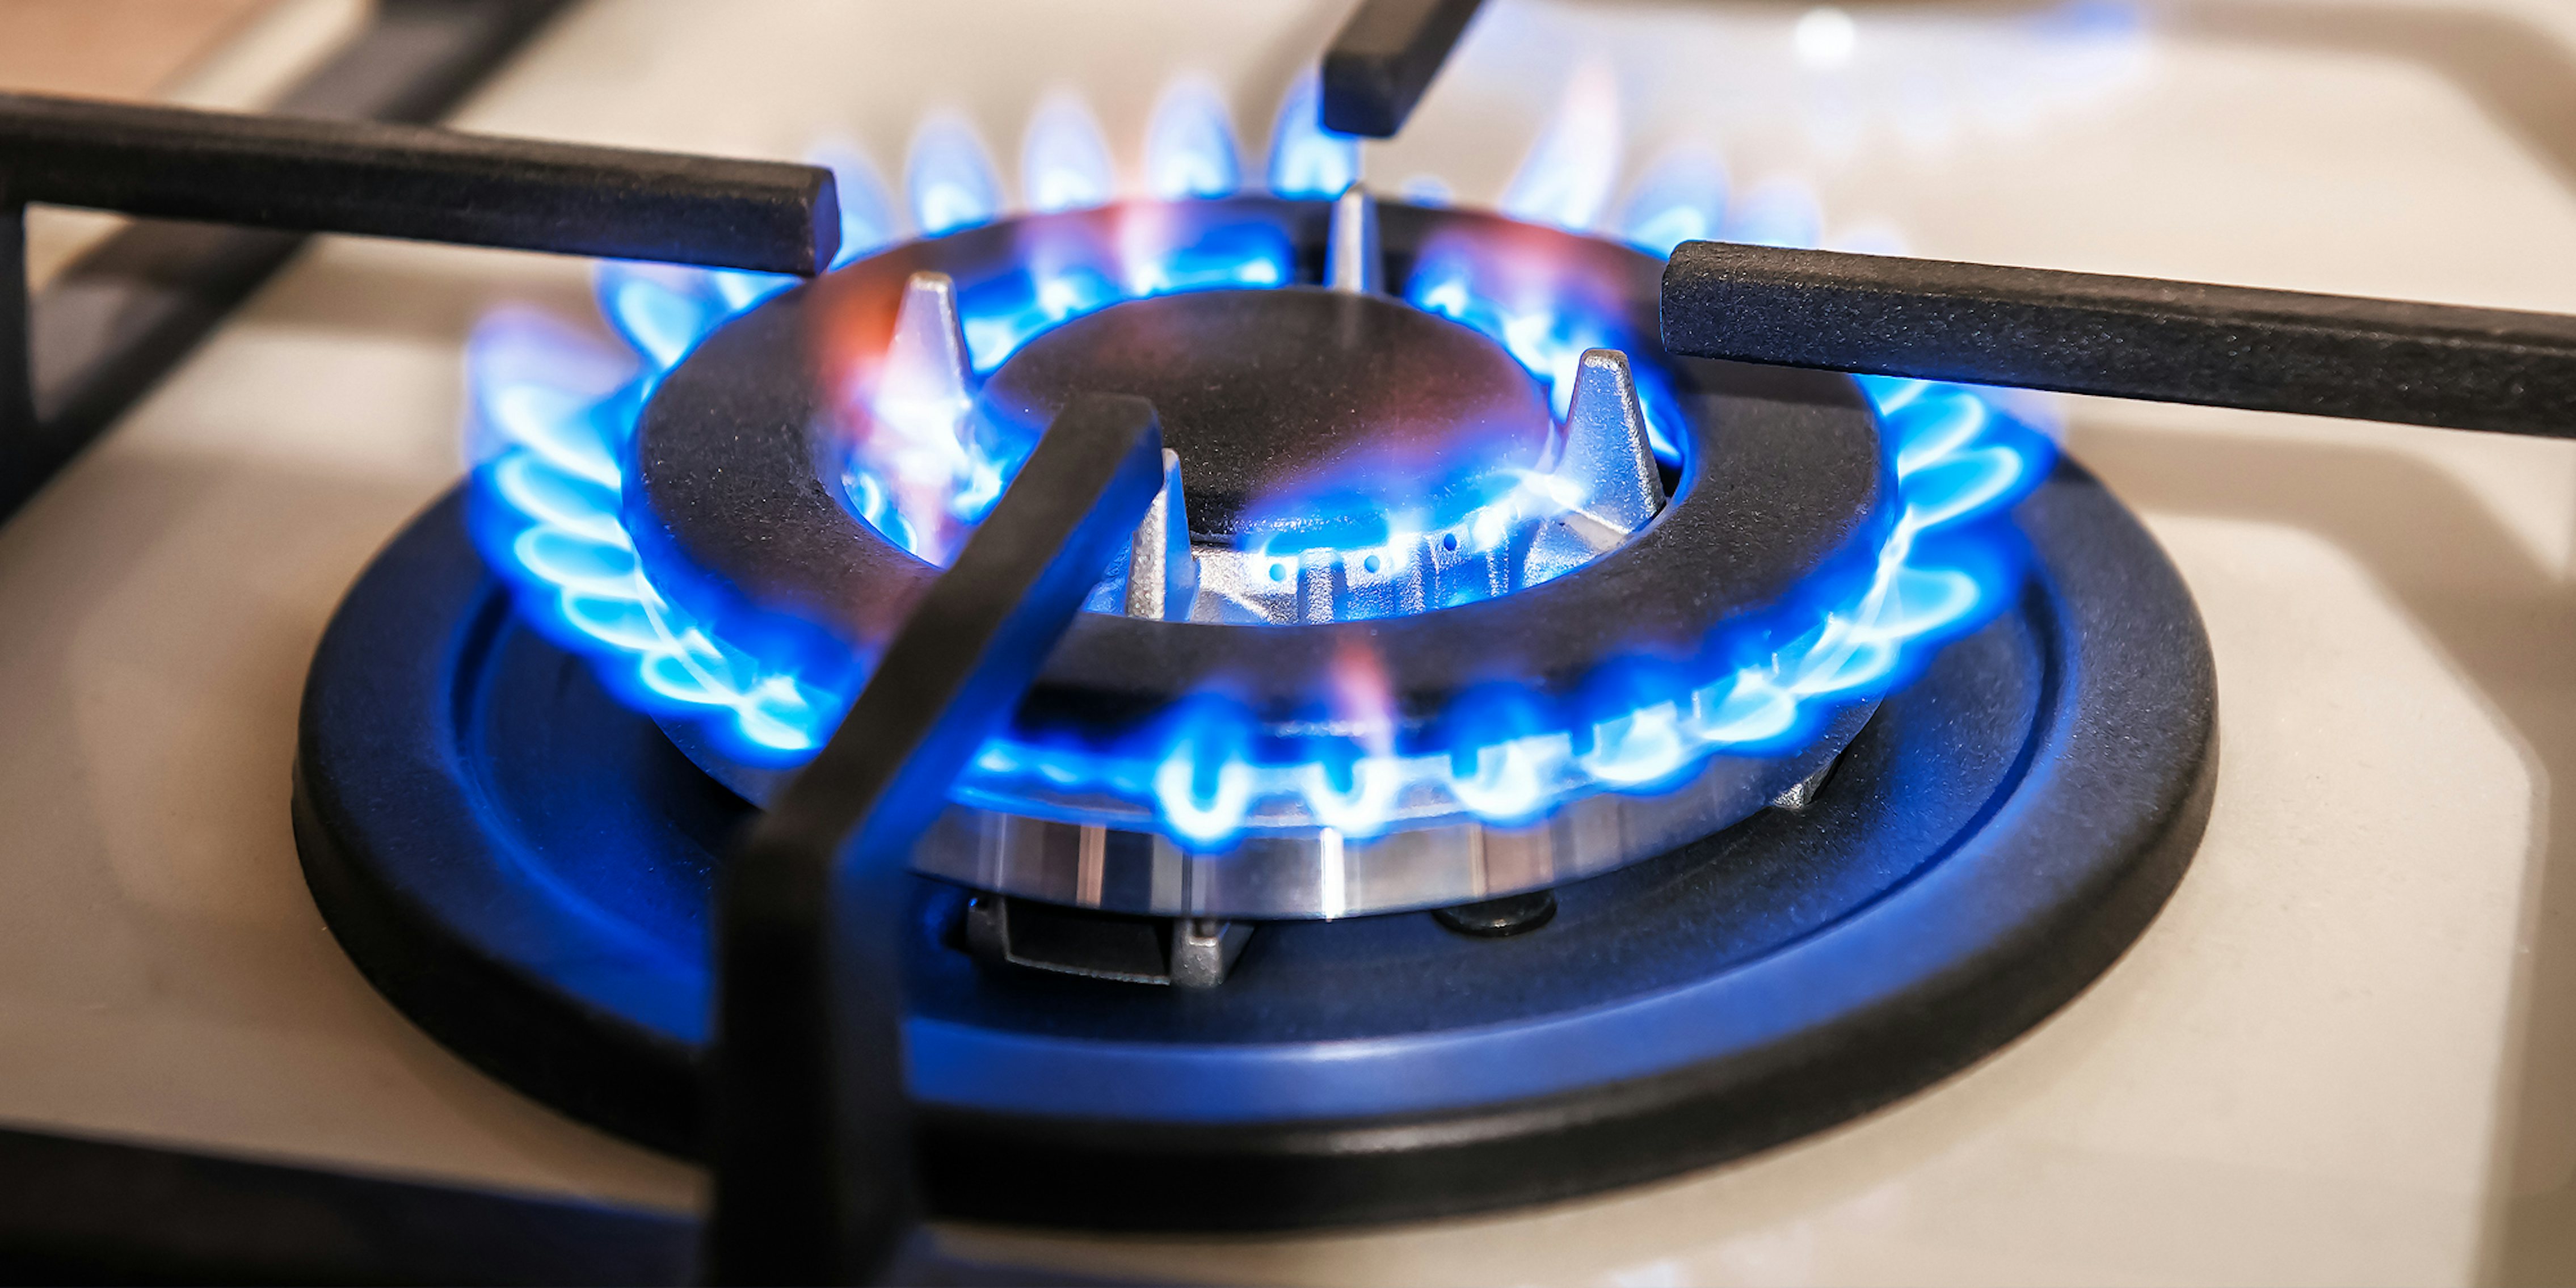 gas stovetop with blue flames